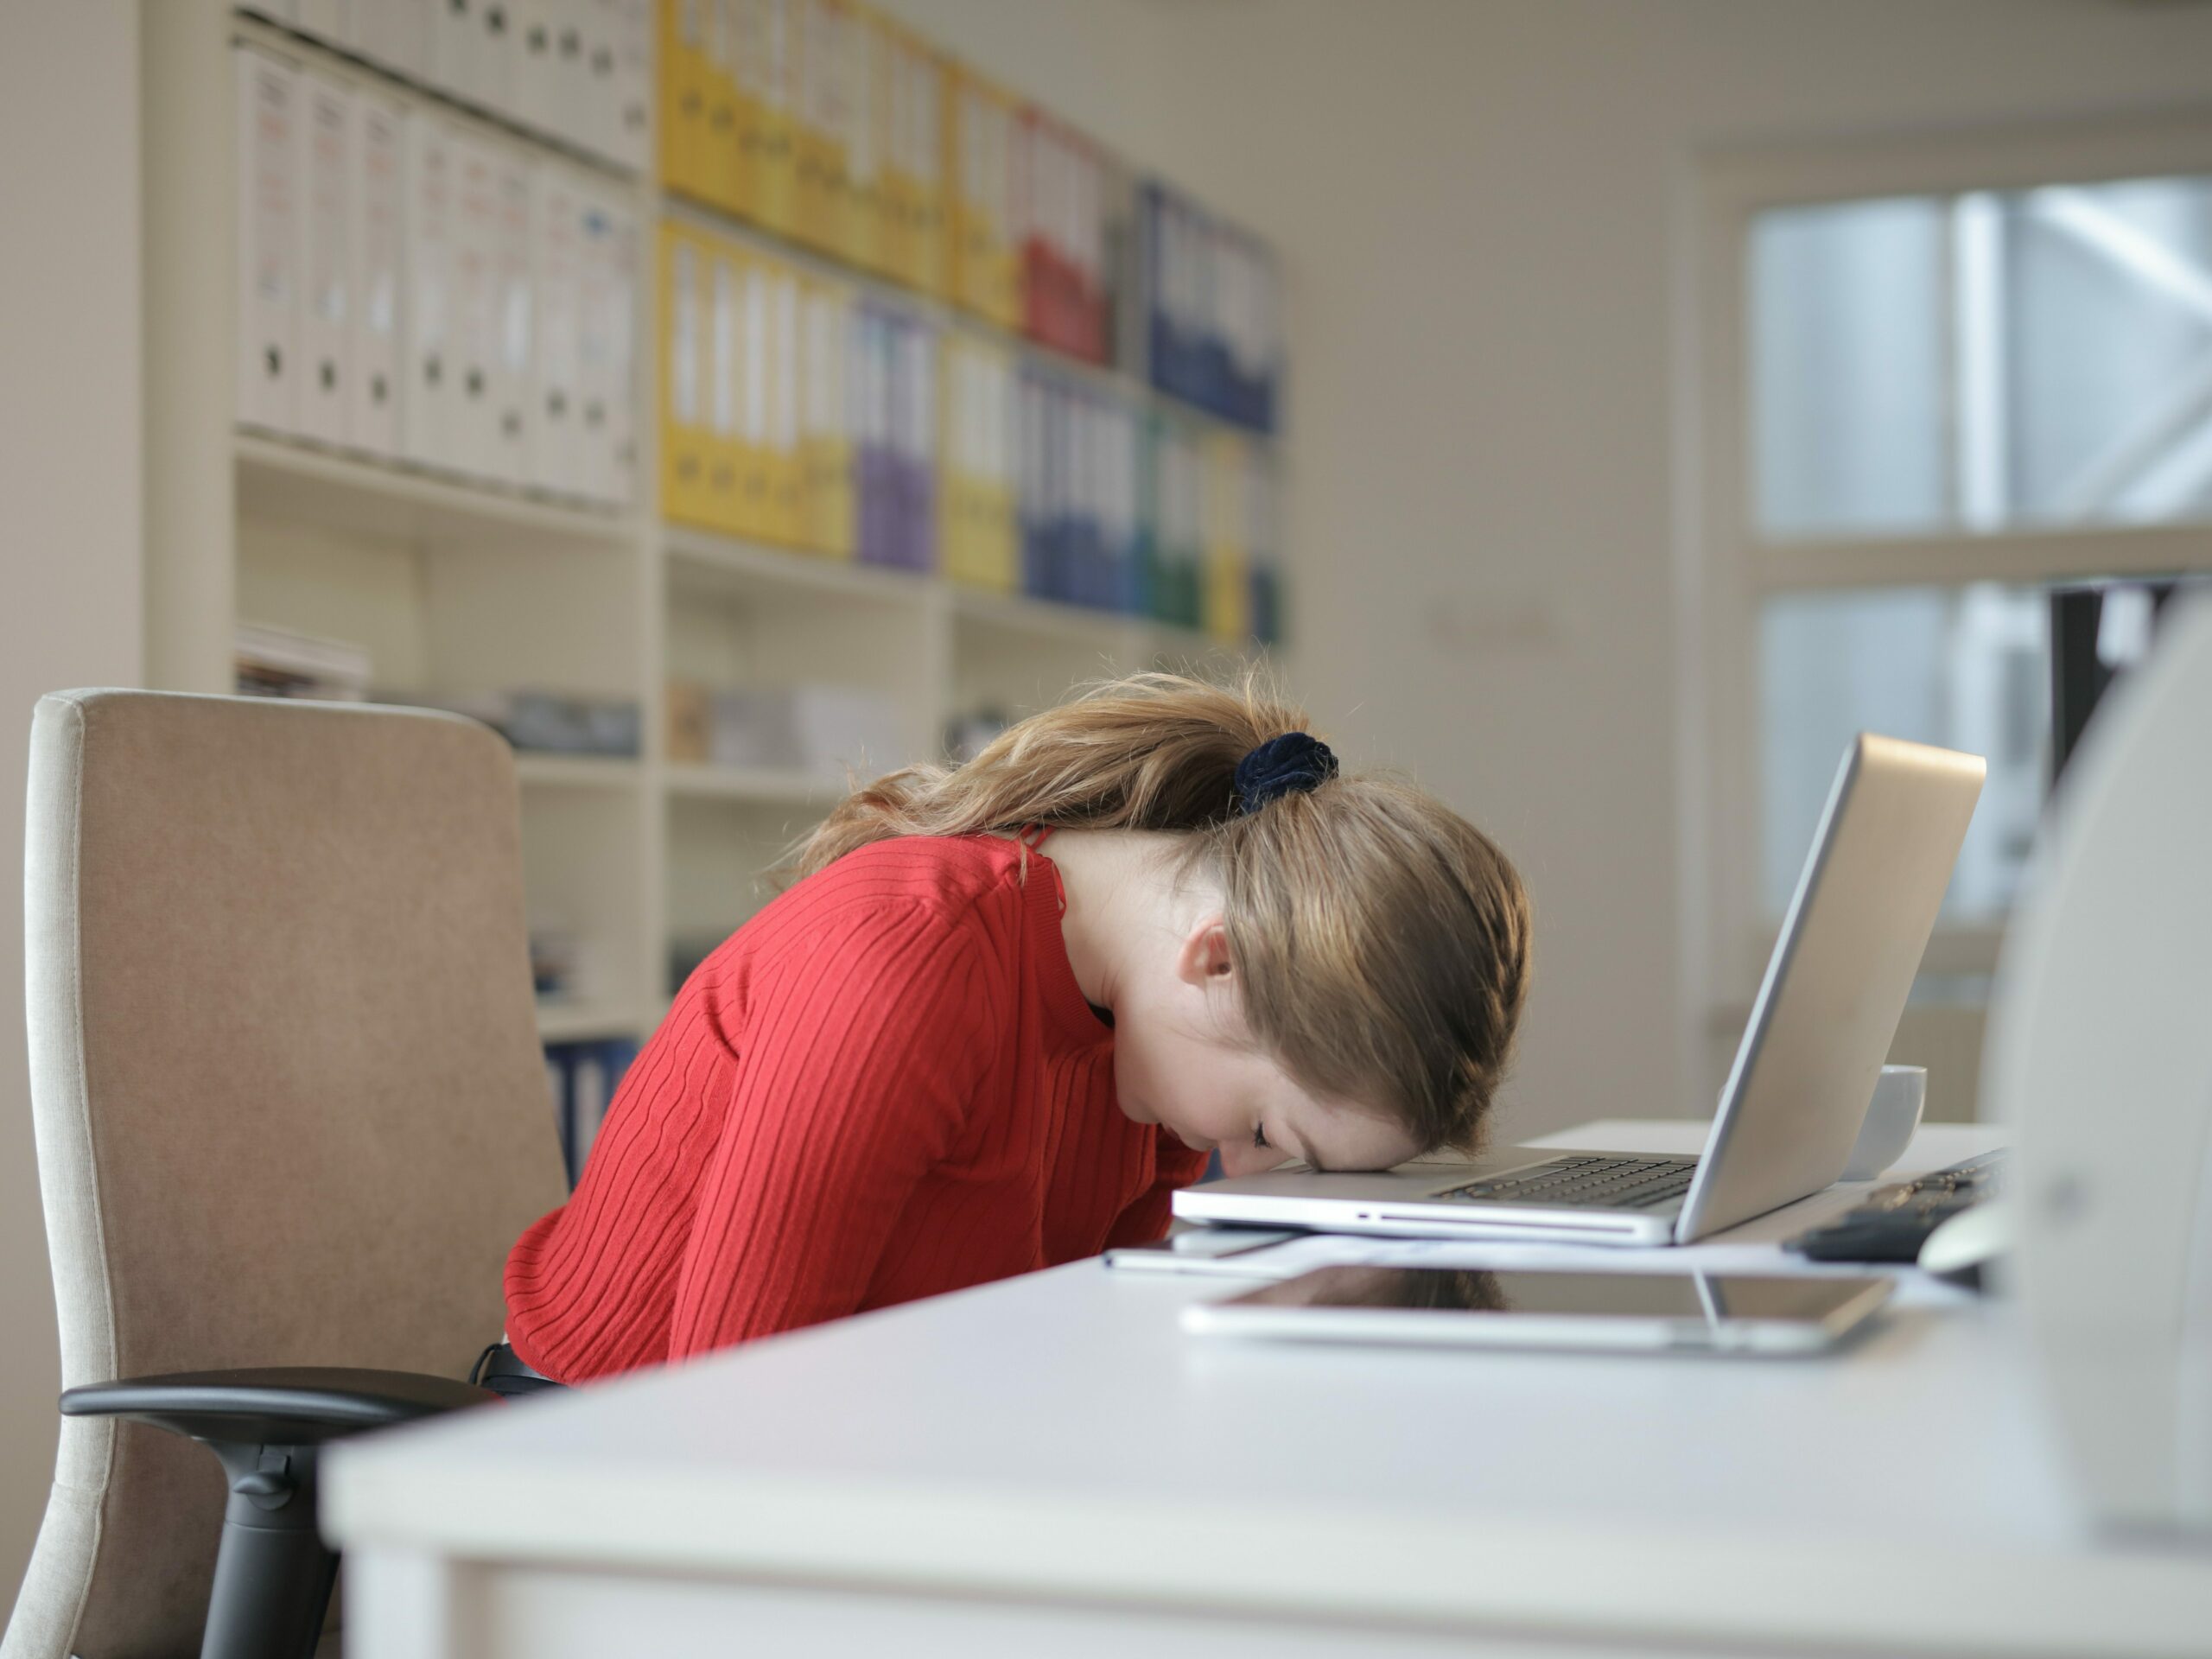 Spring fatigue in the workplace